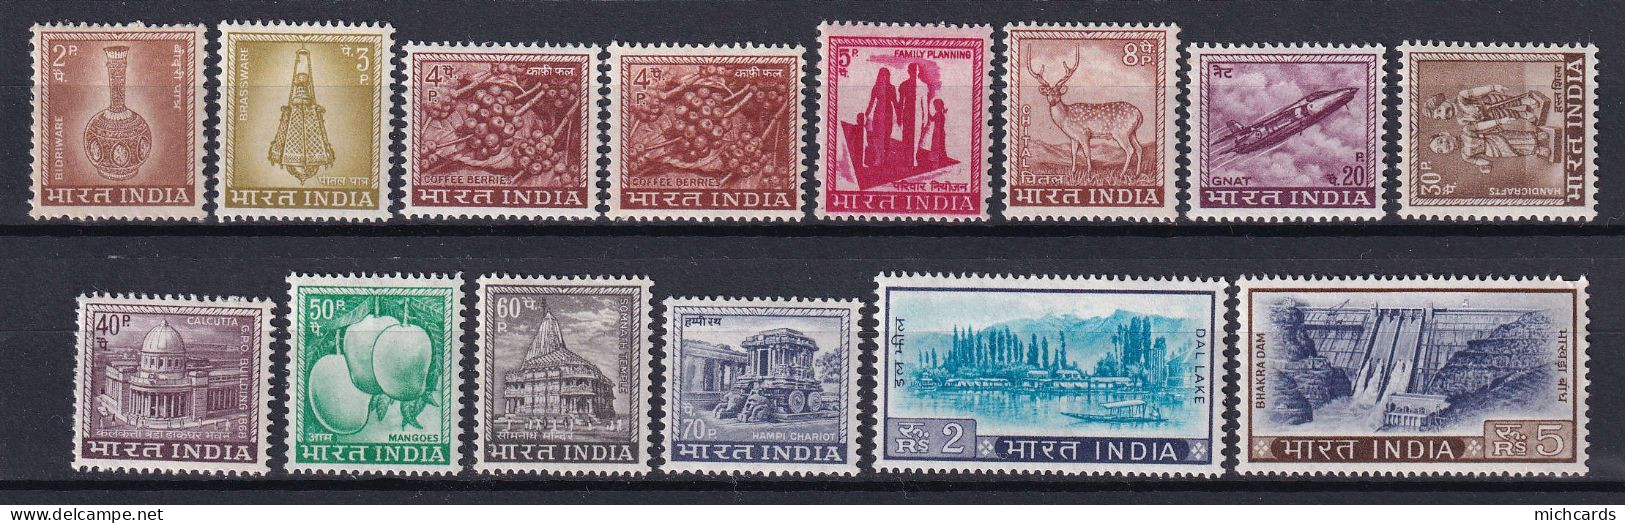 185 INDE 1967/69 - Yvert 222/32 - Serie Courante Definitive - Neuf ** (MNH) Sans Charniere - Nuovi